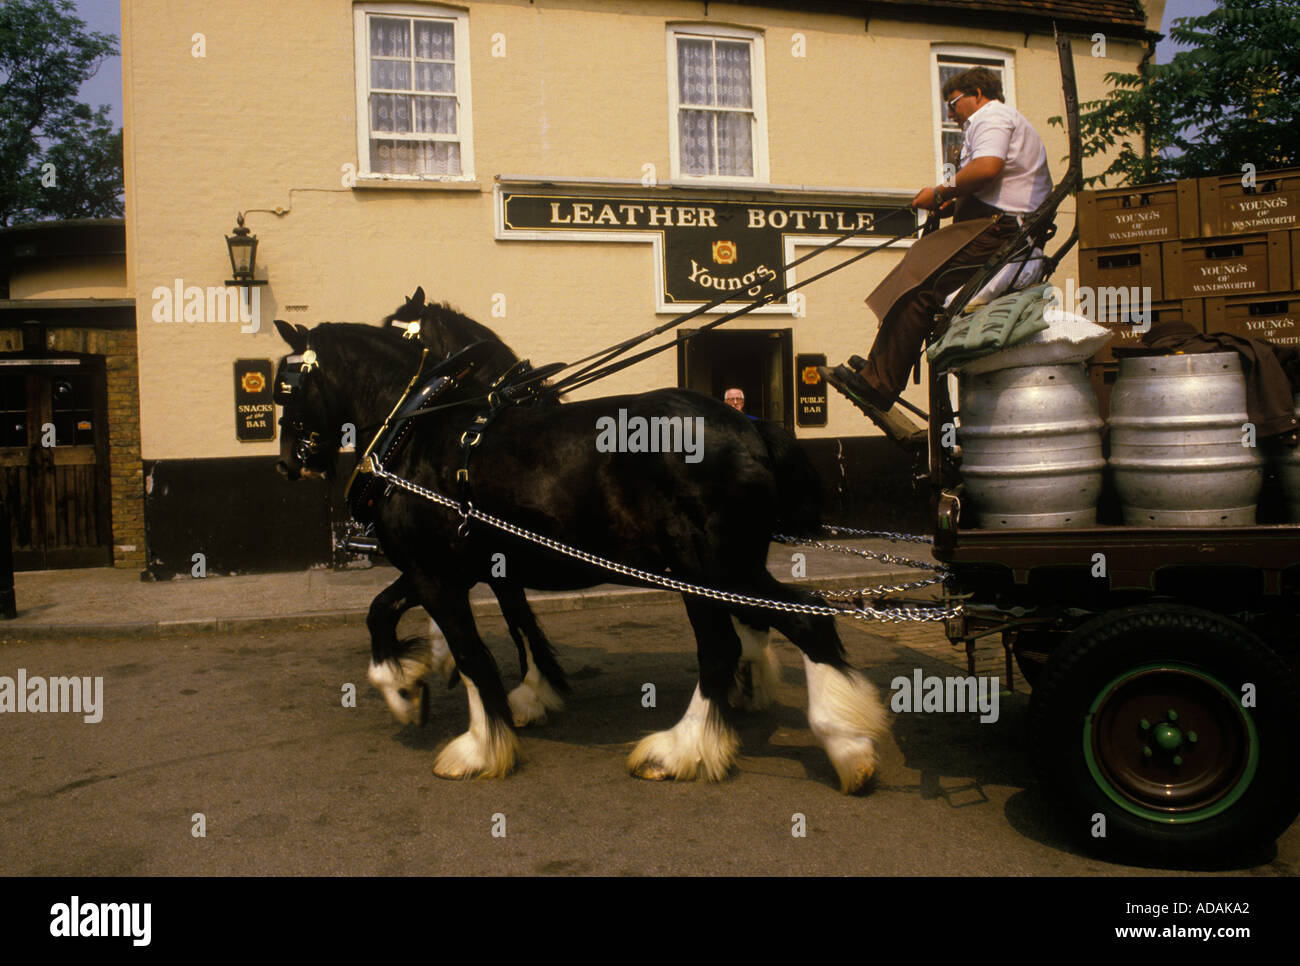 Youngs Brewery horse and cart Wandsworth traditional delivery of beer to local pub Leather Bottle. England 1980s circa 1985 UK HOMER SYKES Stock Photo